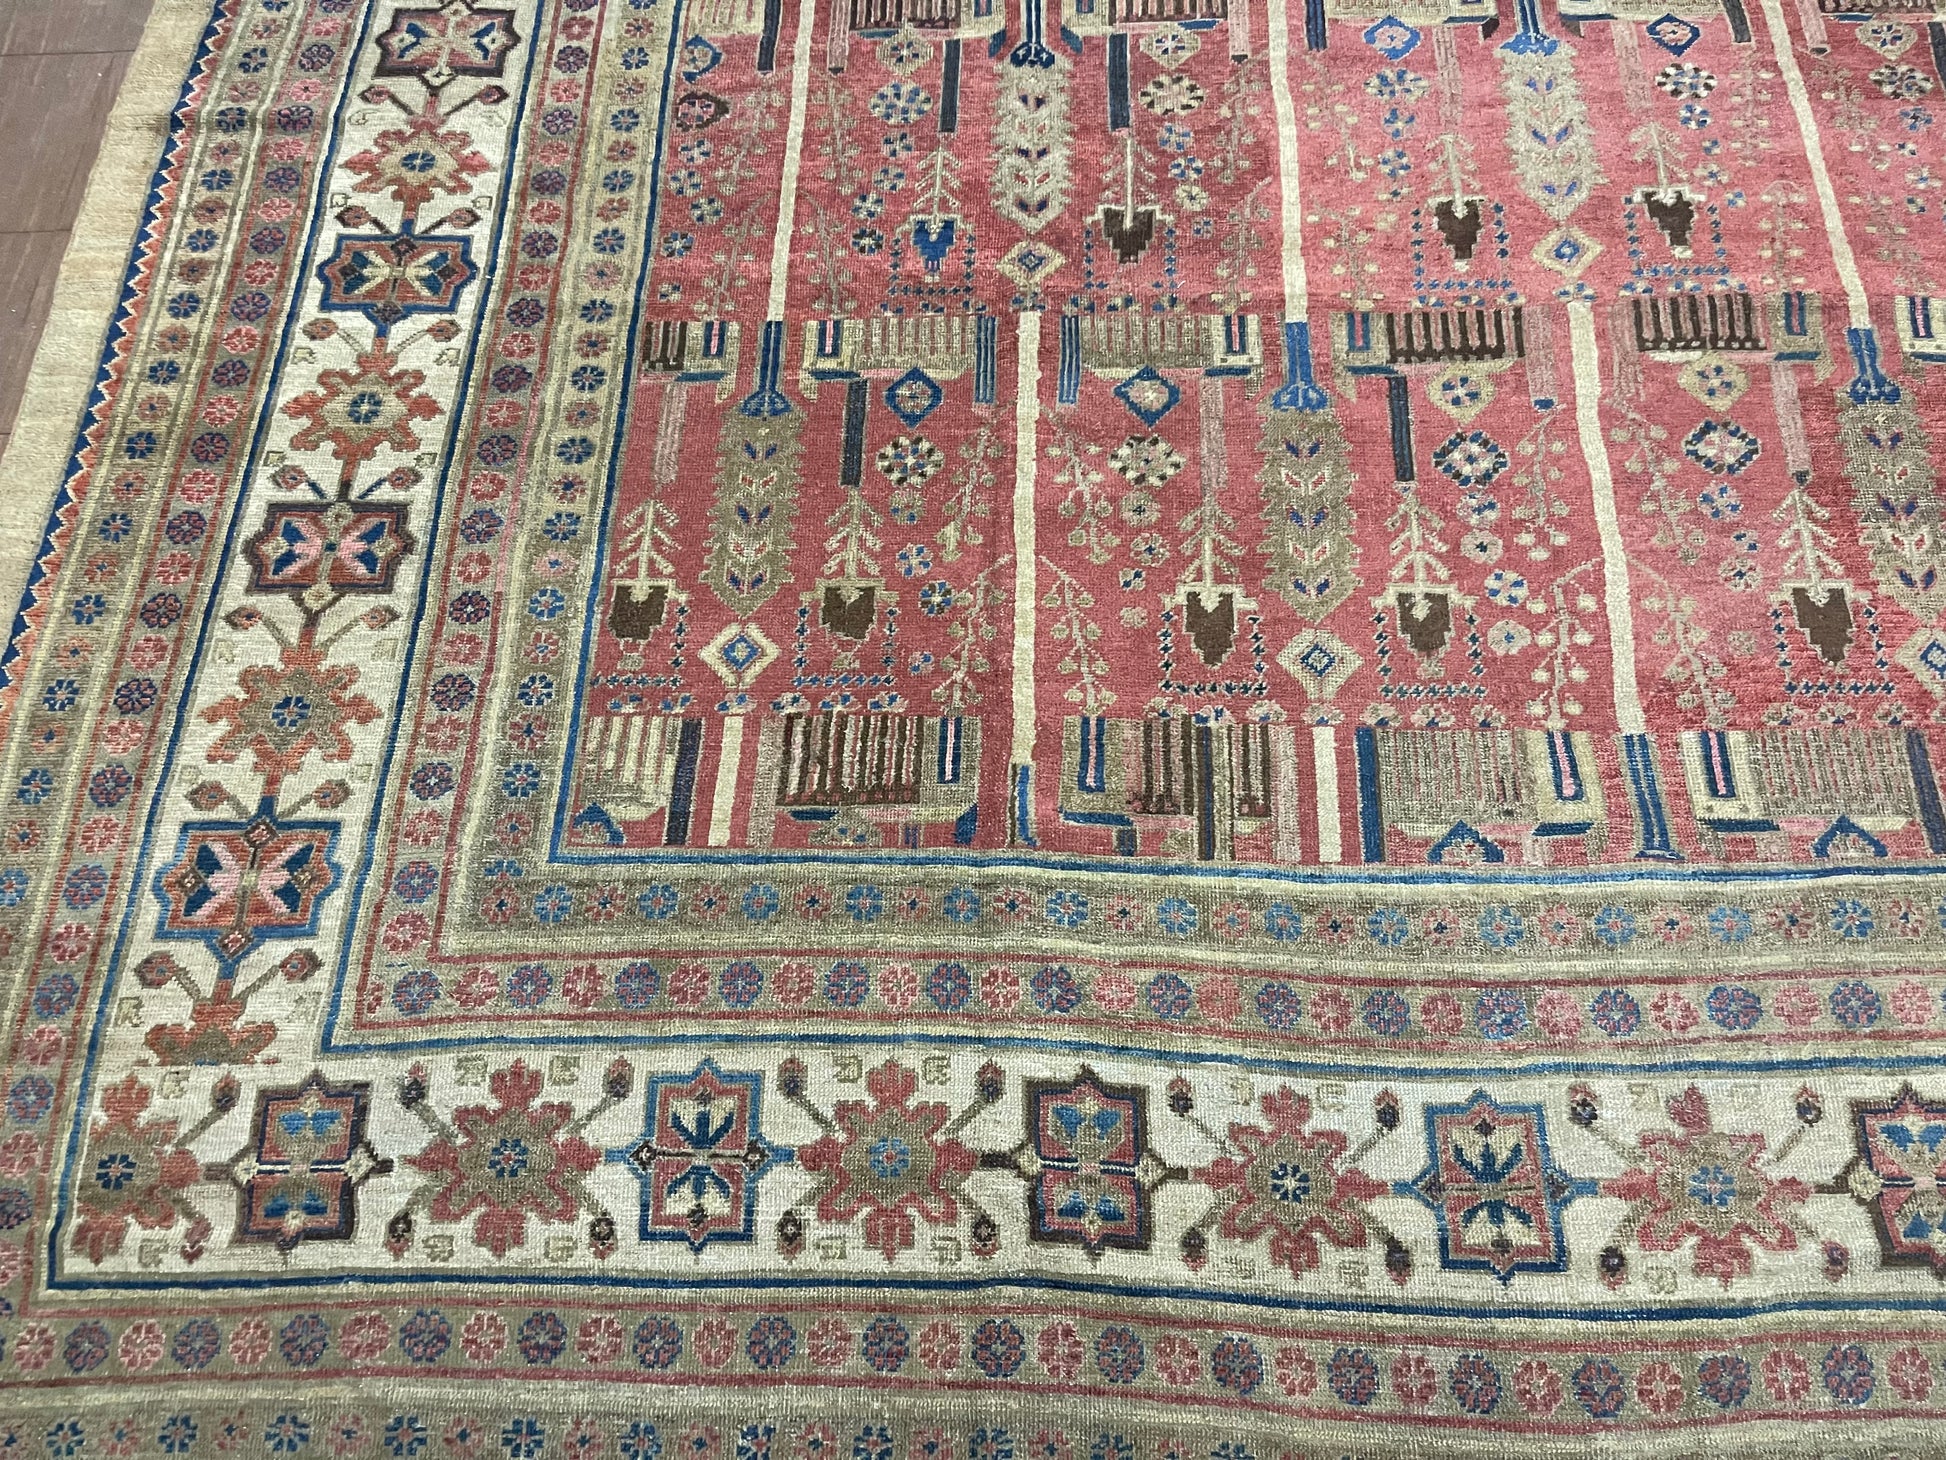 Overhead shot of the palace-sized rug displaying its grand dimensions